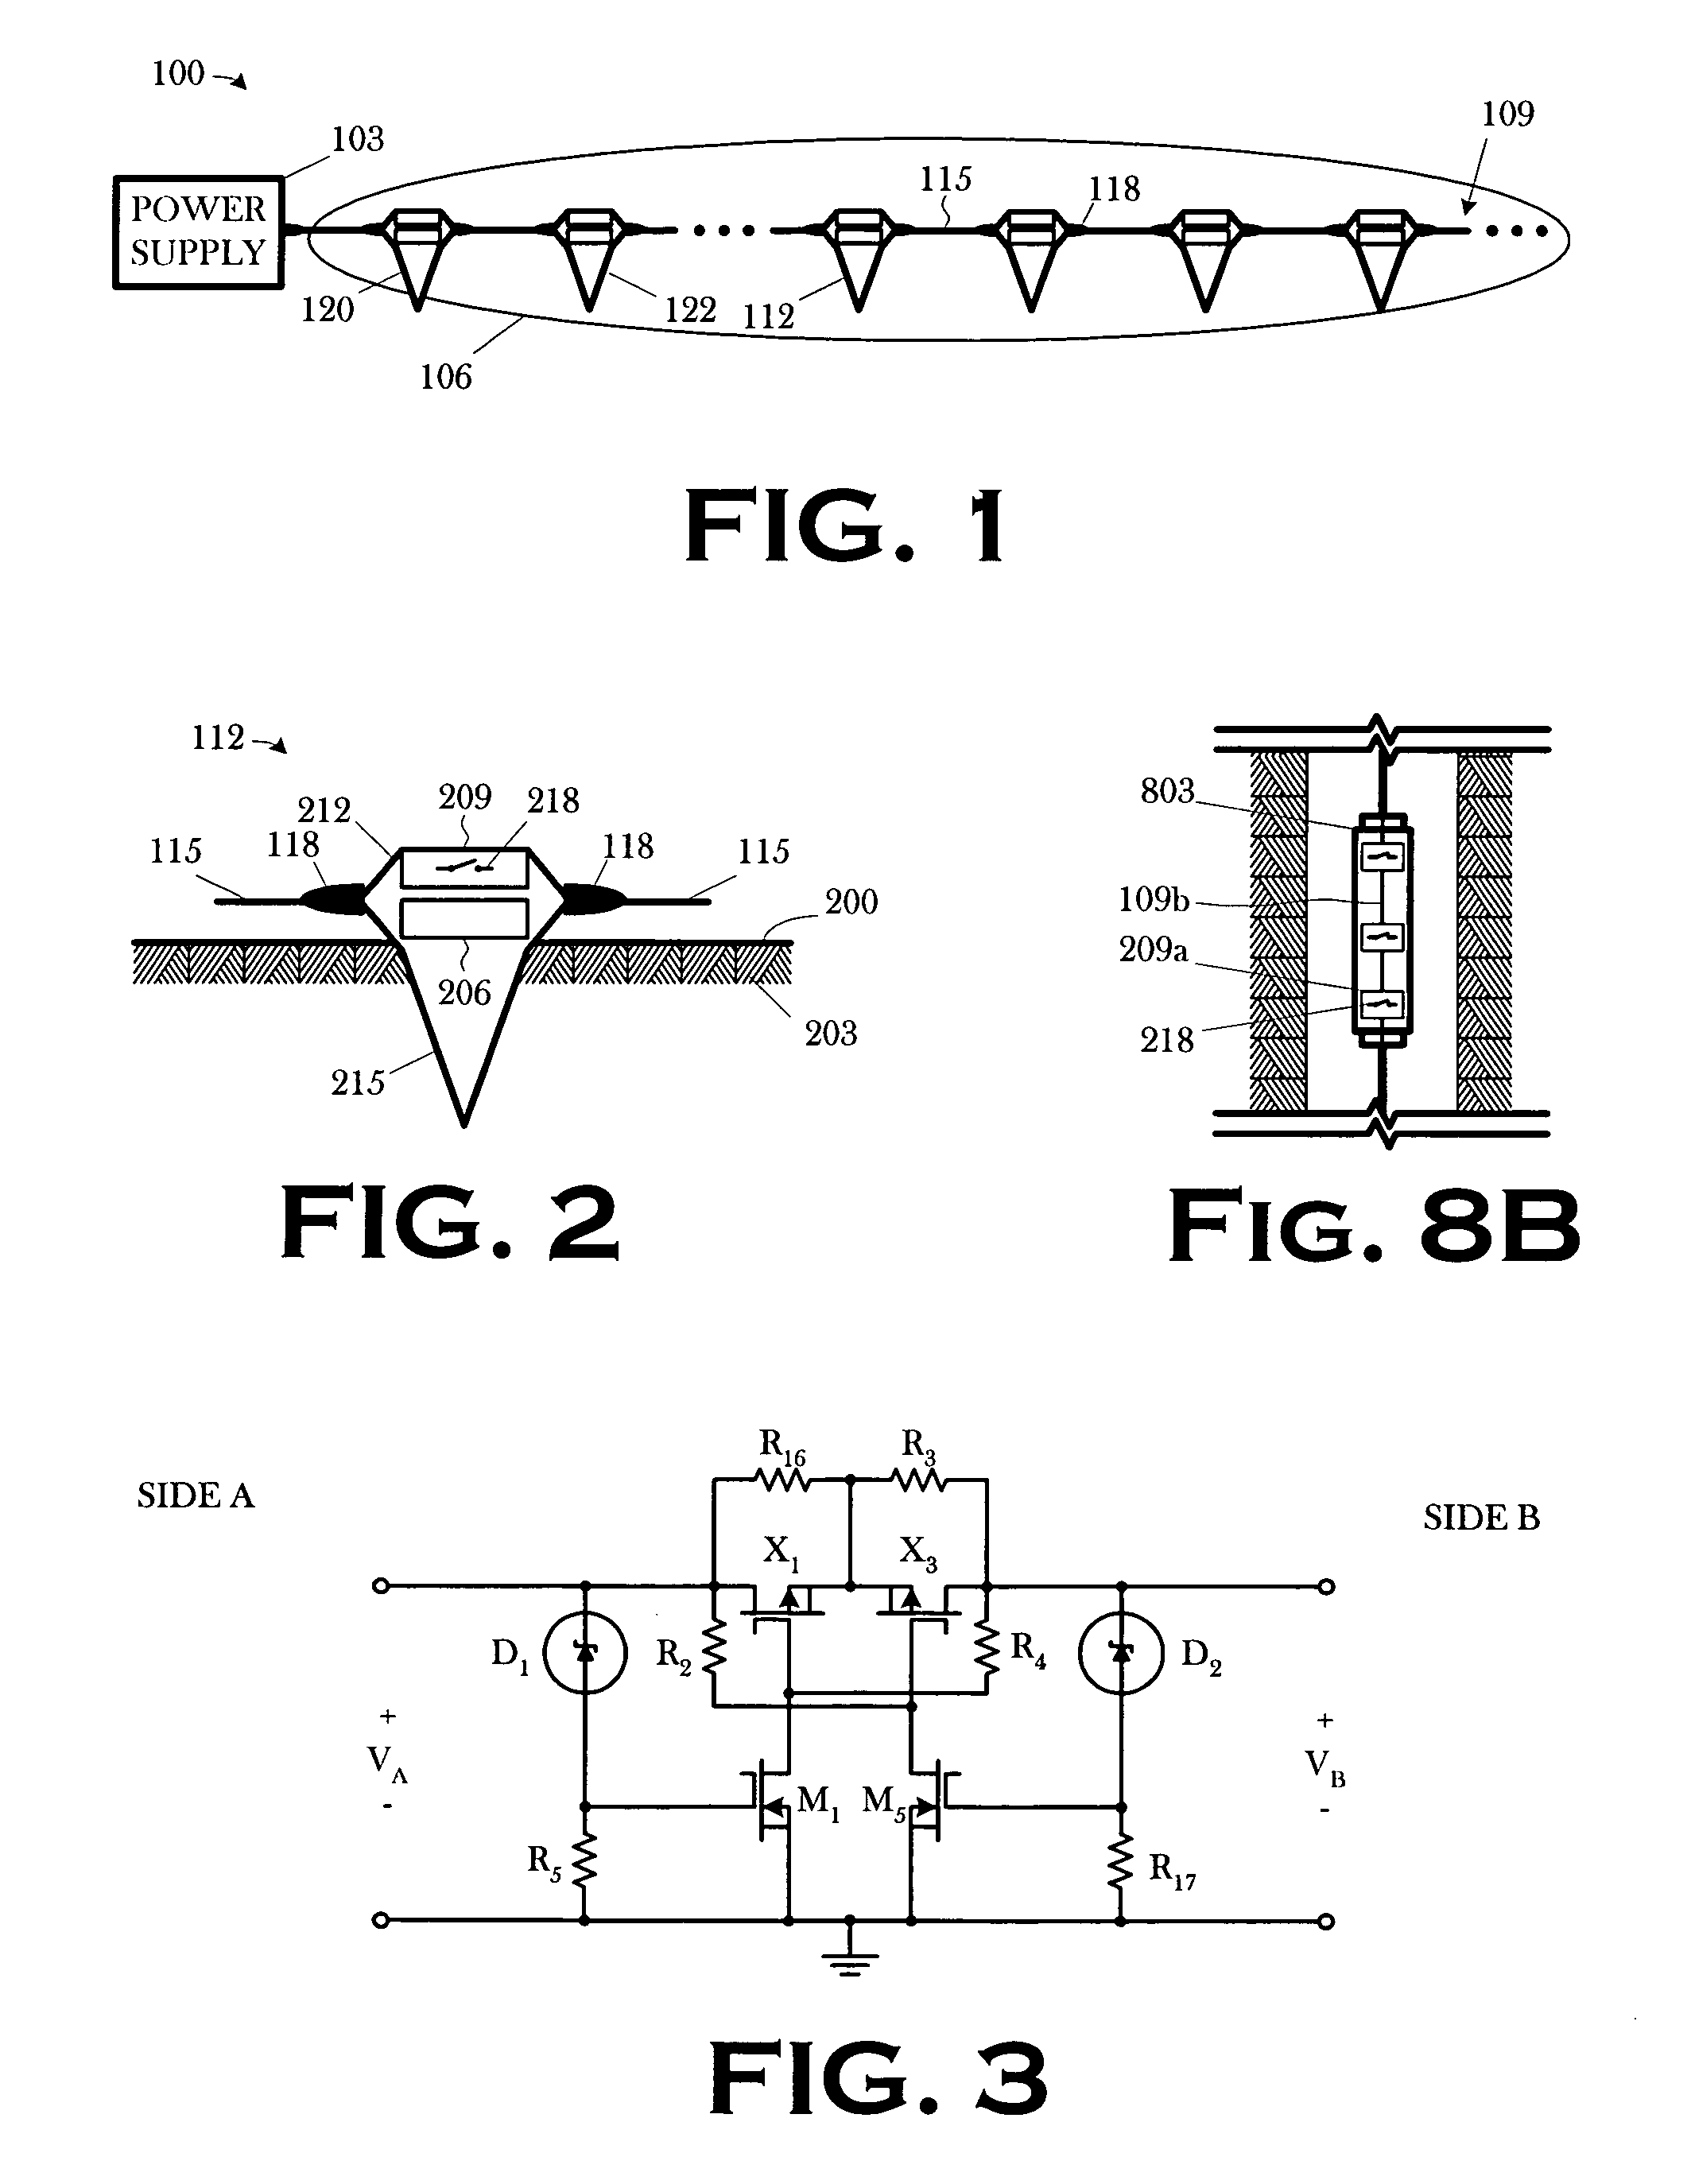 Short circuit protection for serially connected nodes in a hdyrocarbon exploration or production electrical system